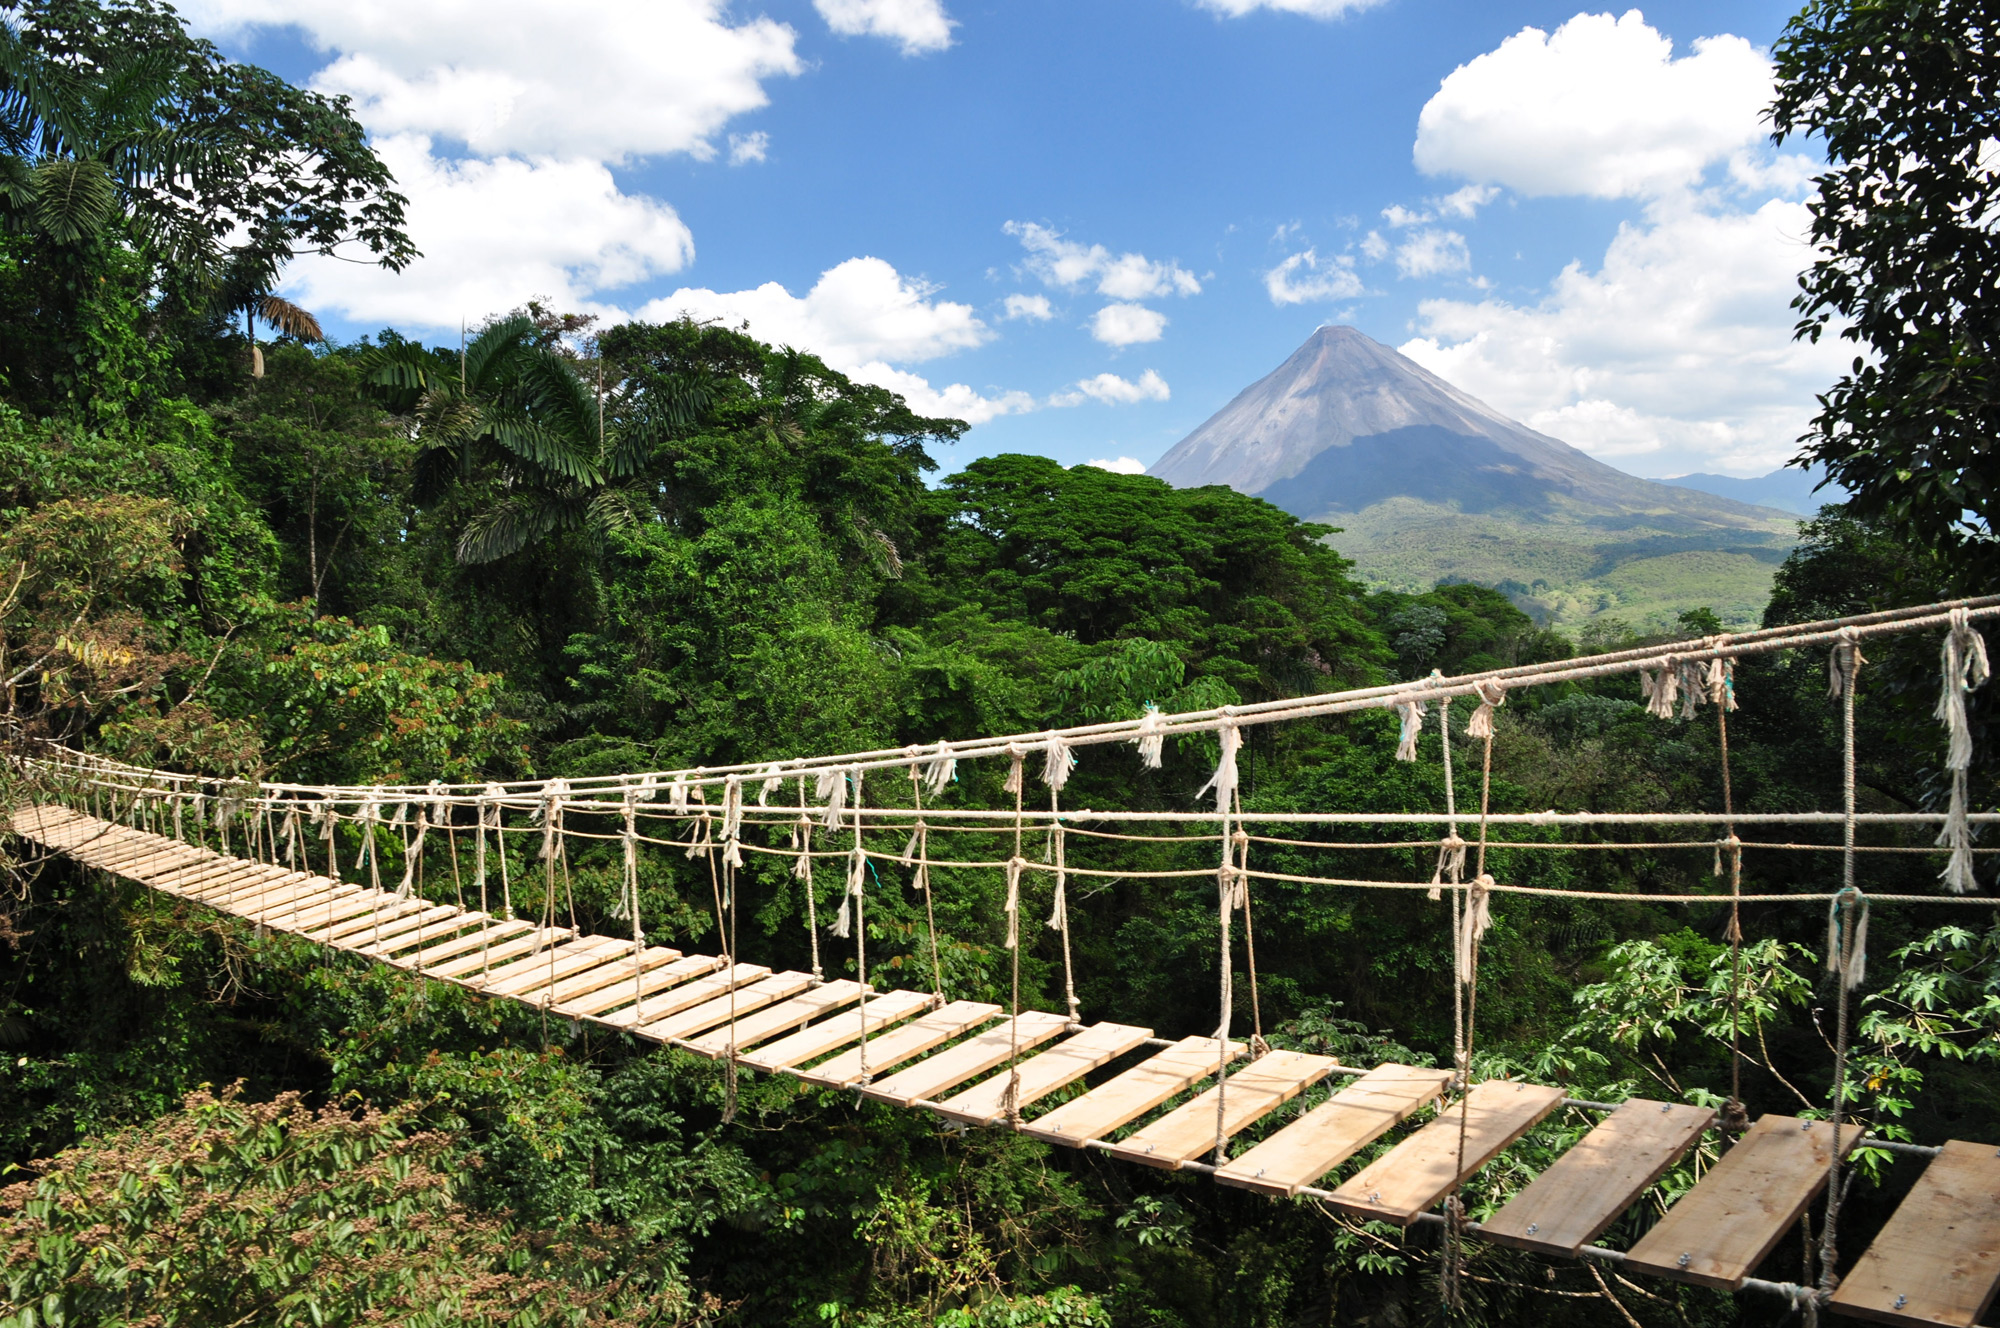 Costa Rica choose to shift to the renewable energy and the care of the environment